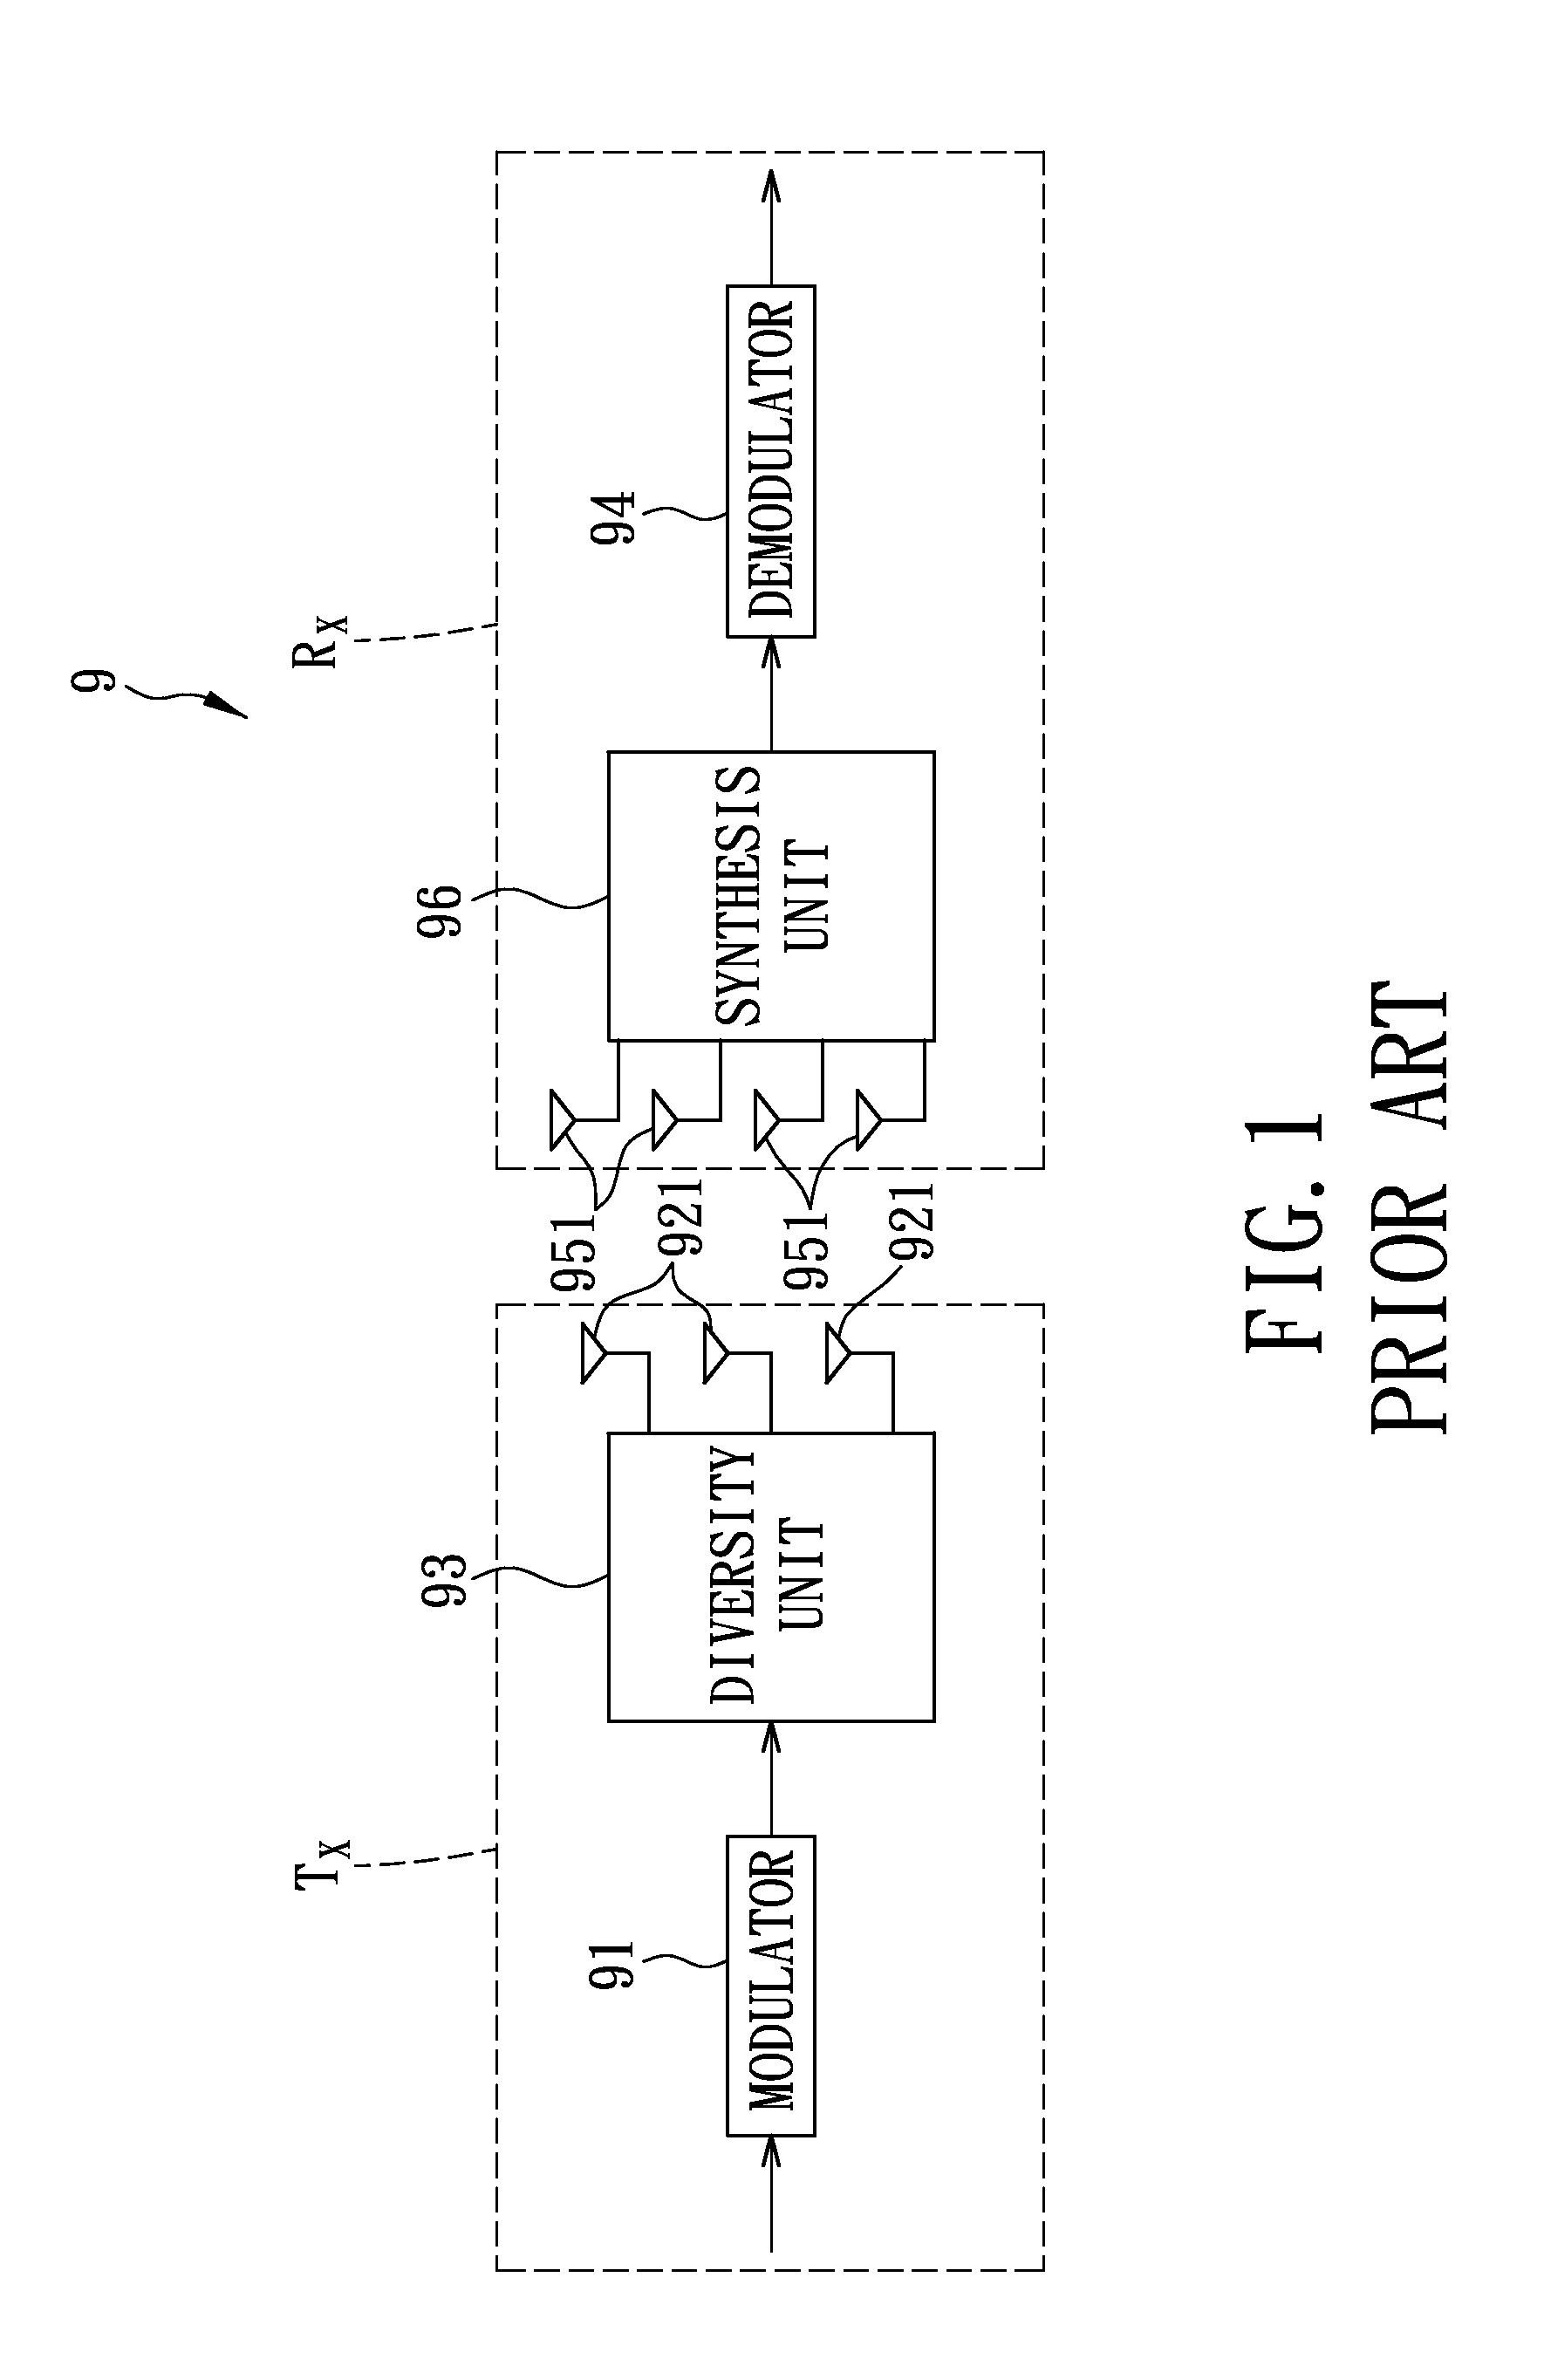 Evaluation device and method for providing a transceiver system with performance information thereof